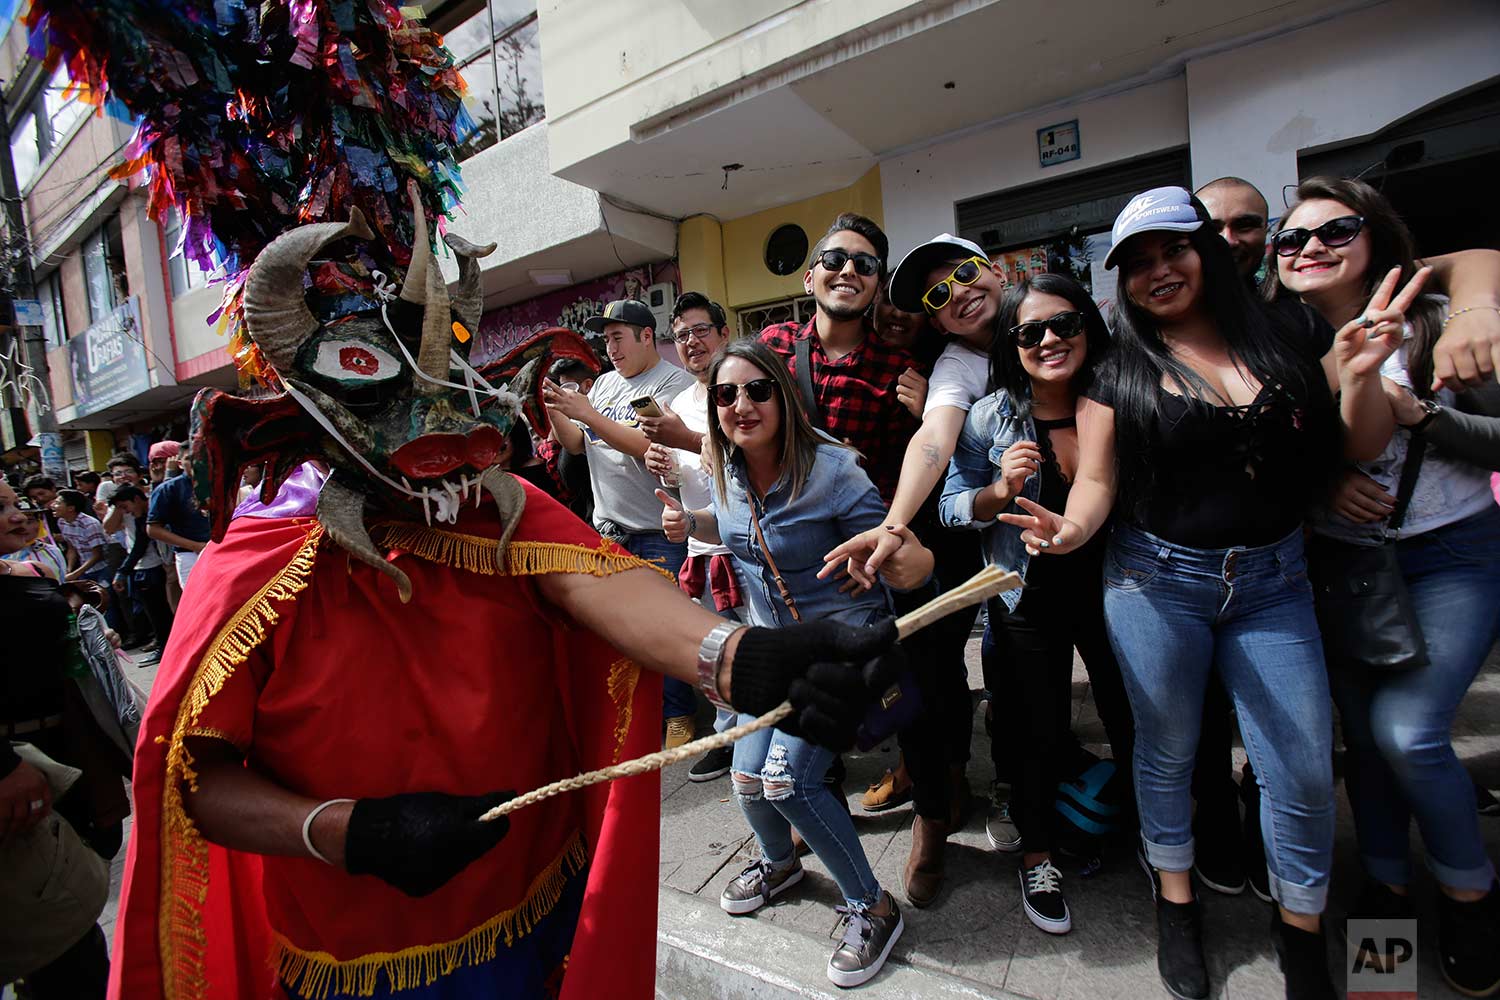  Revelers watch as people dressed as devils parade past during the traditional New Year's festival known as "La Diablada", in Pillaro, Ecuador, Friday, Jan. 5, 2018. (AP Photo/Dolores Ochoa) 